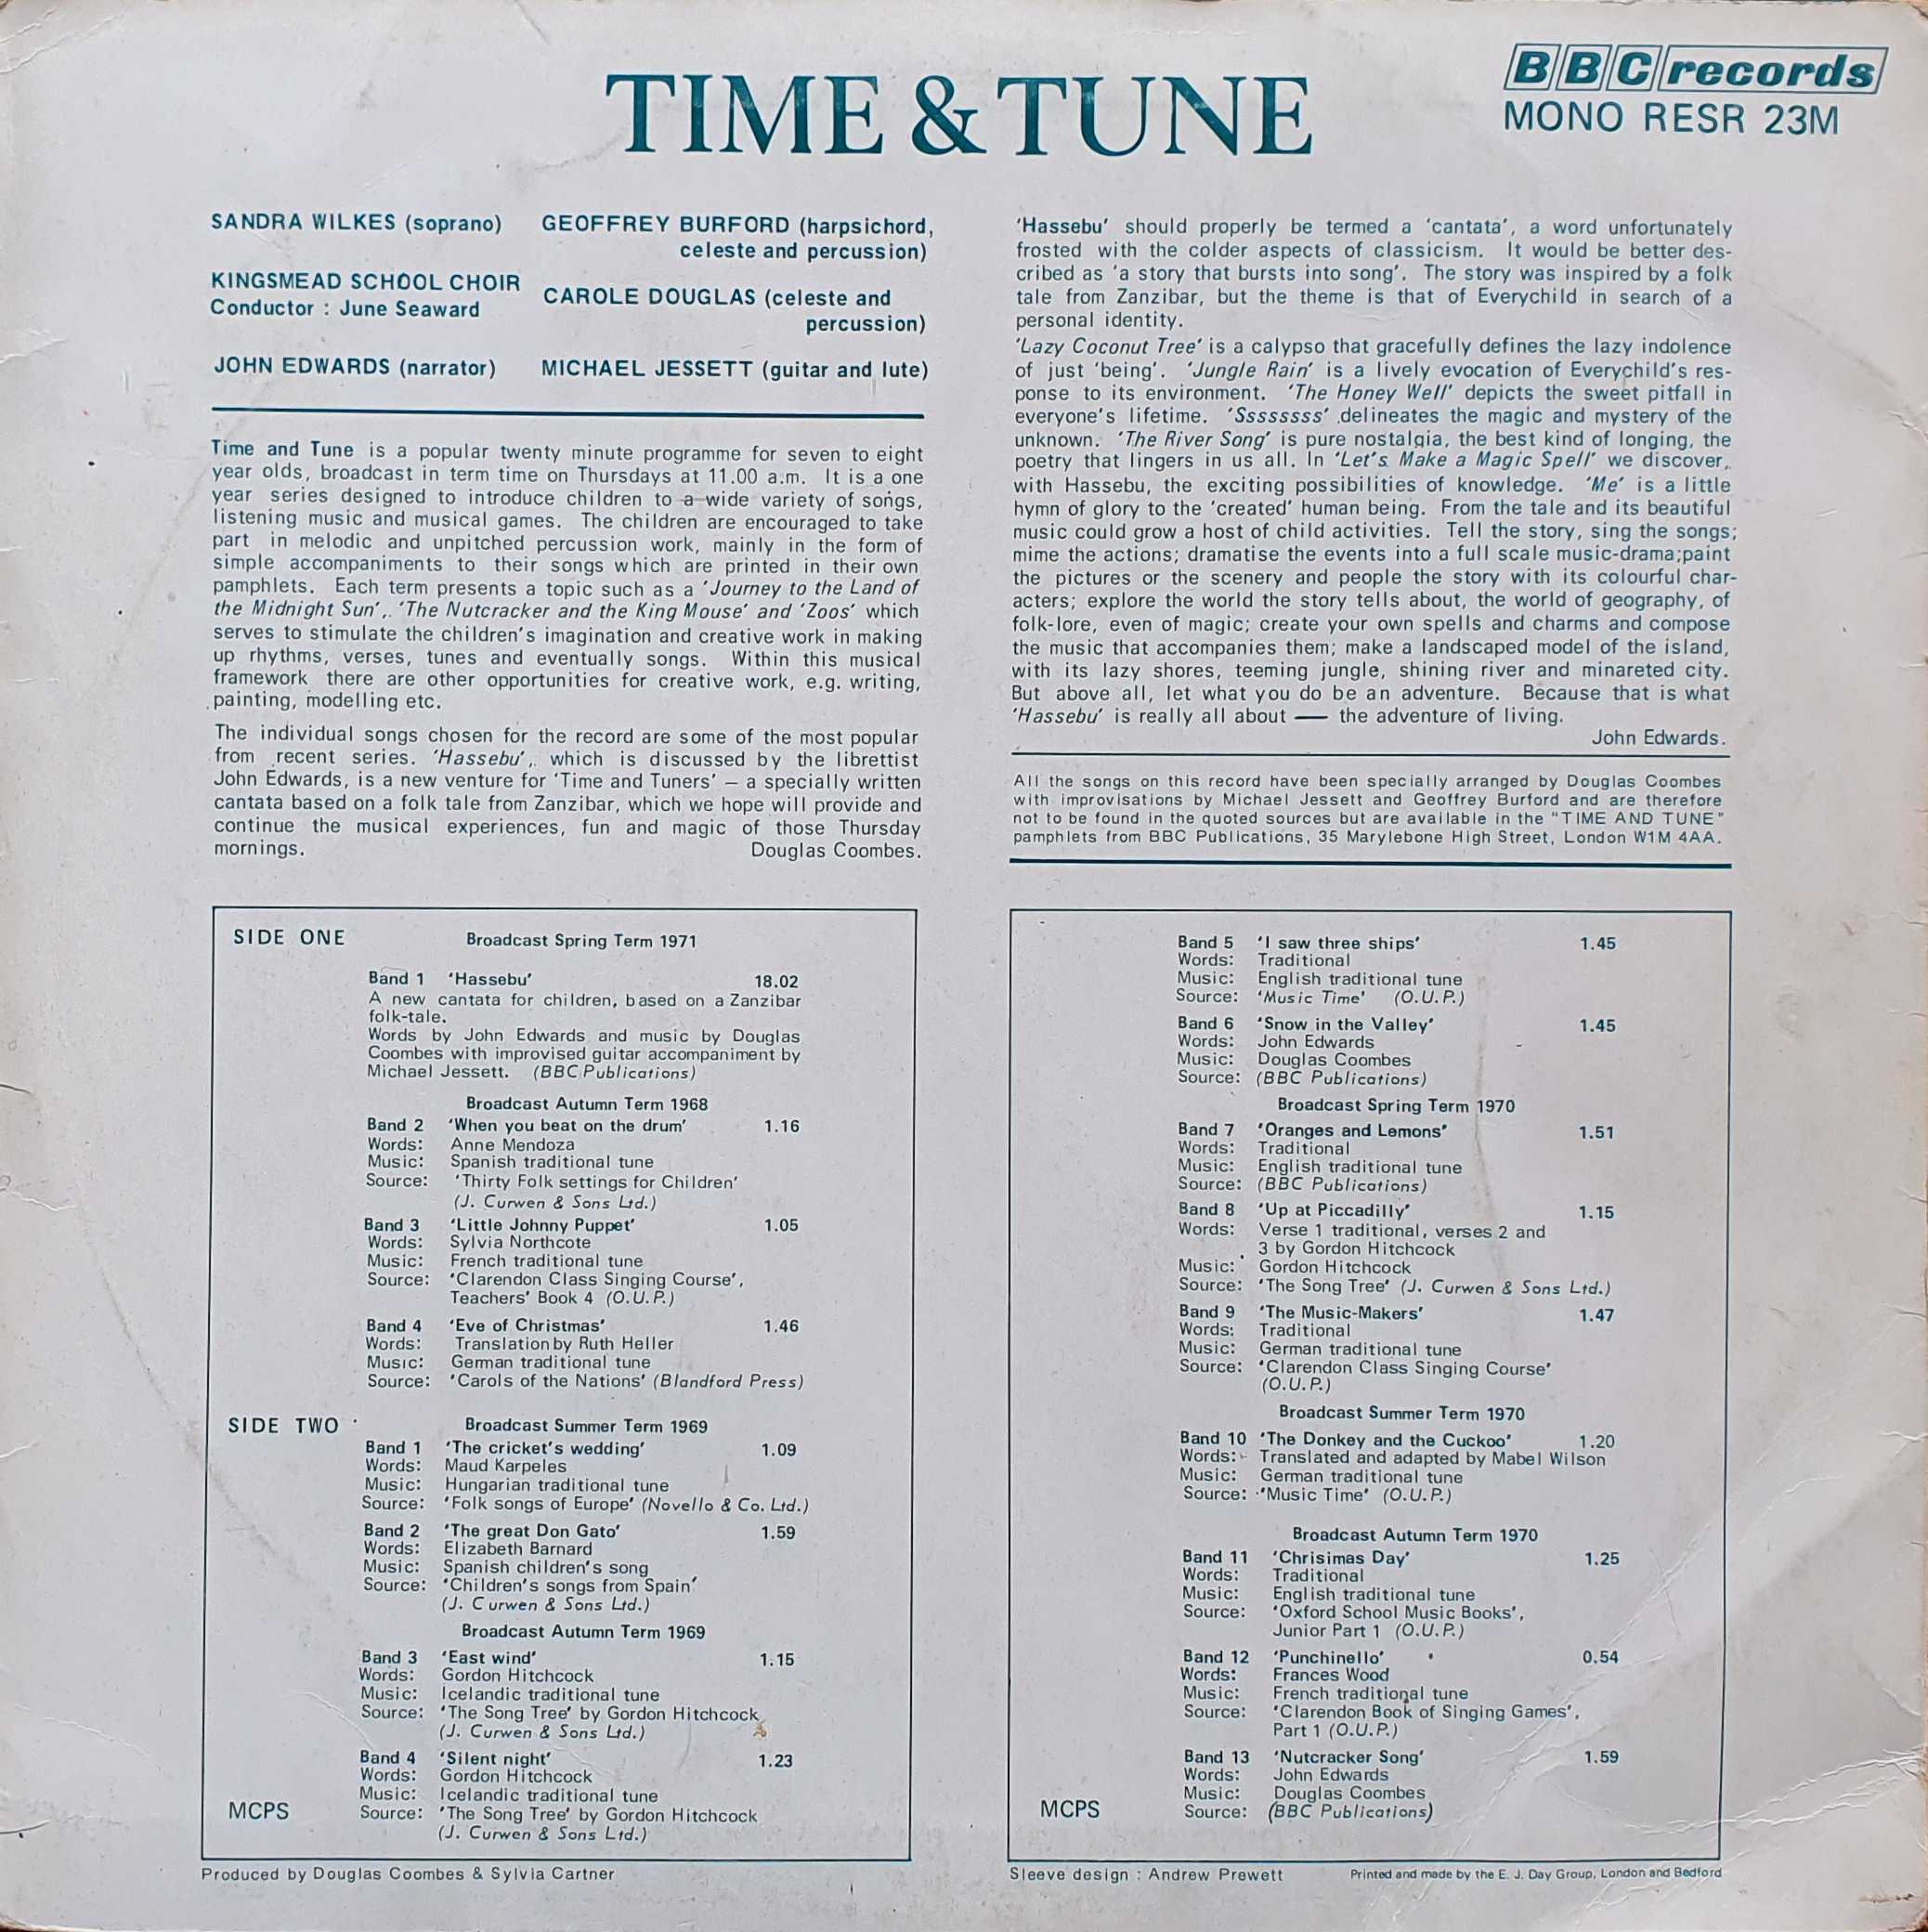 Picture of RESR 23 Time and tune  by artist Various from the BBC records and Tapes library